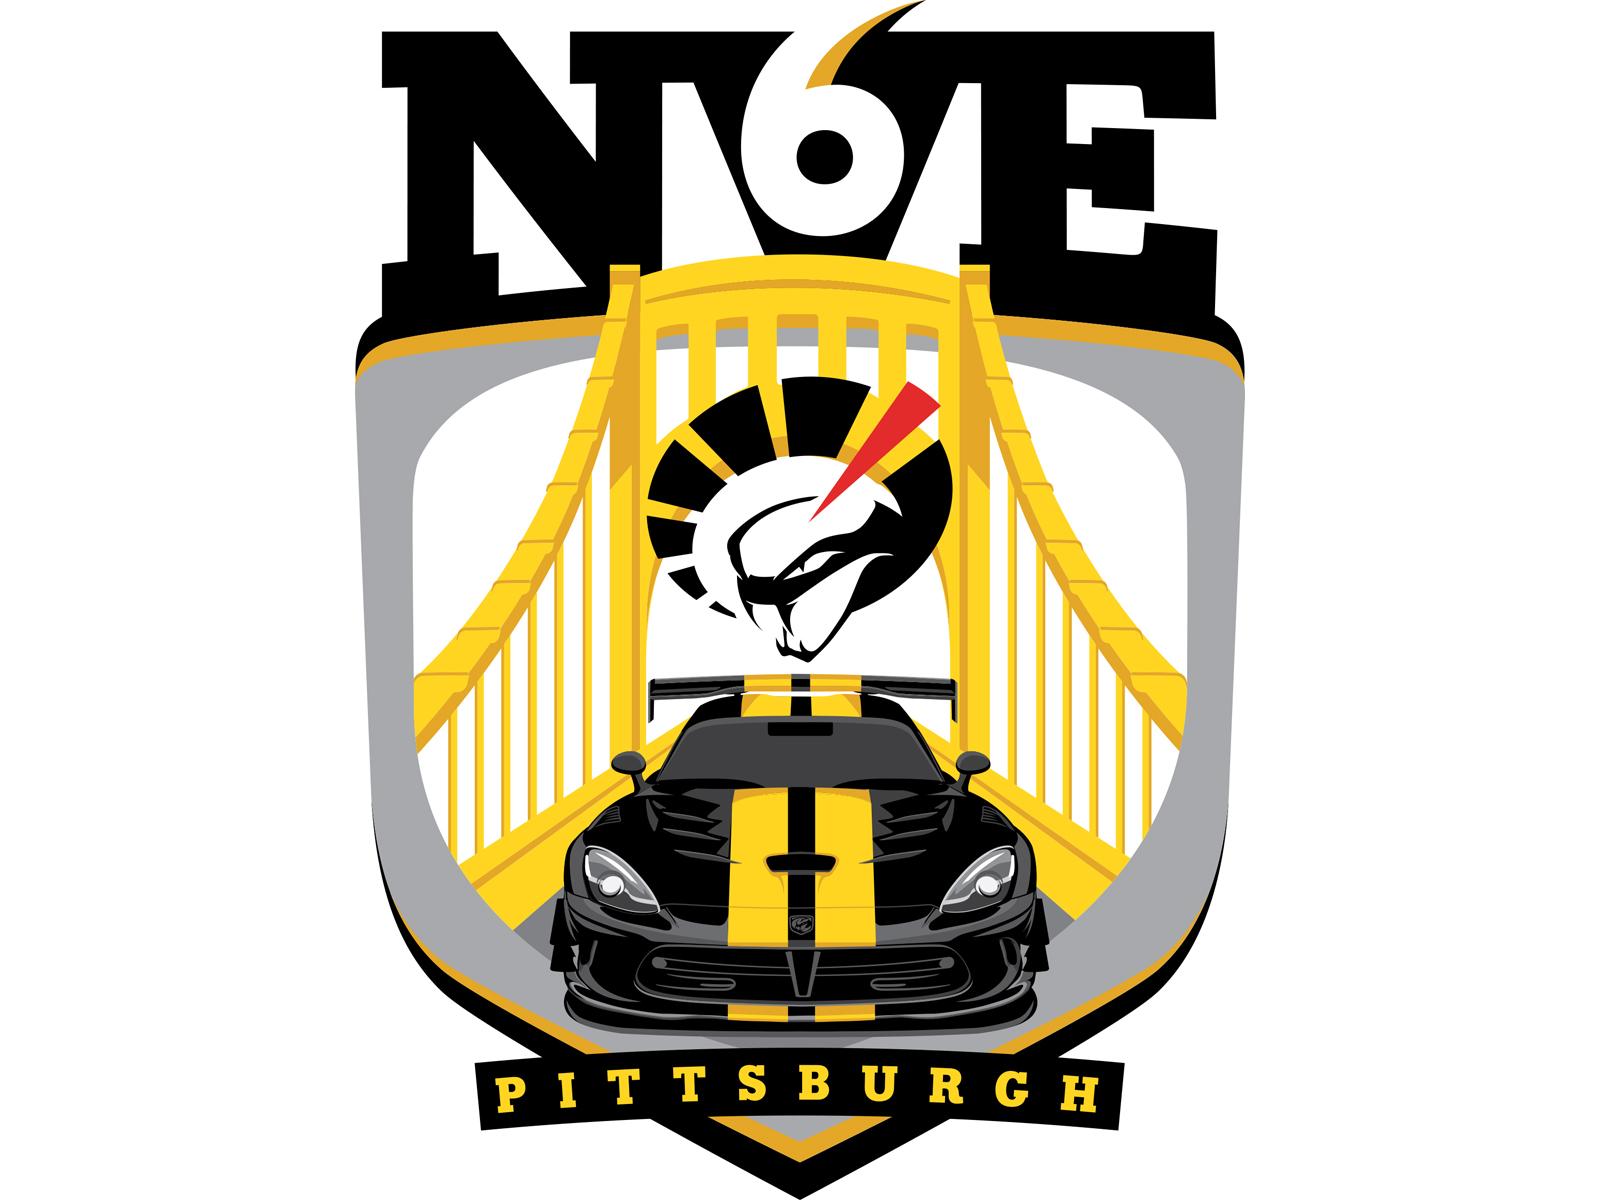 The Official NVE6 Logo